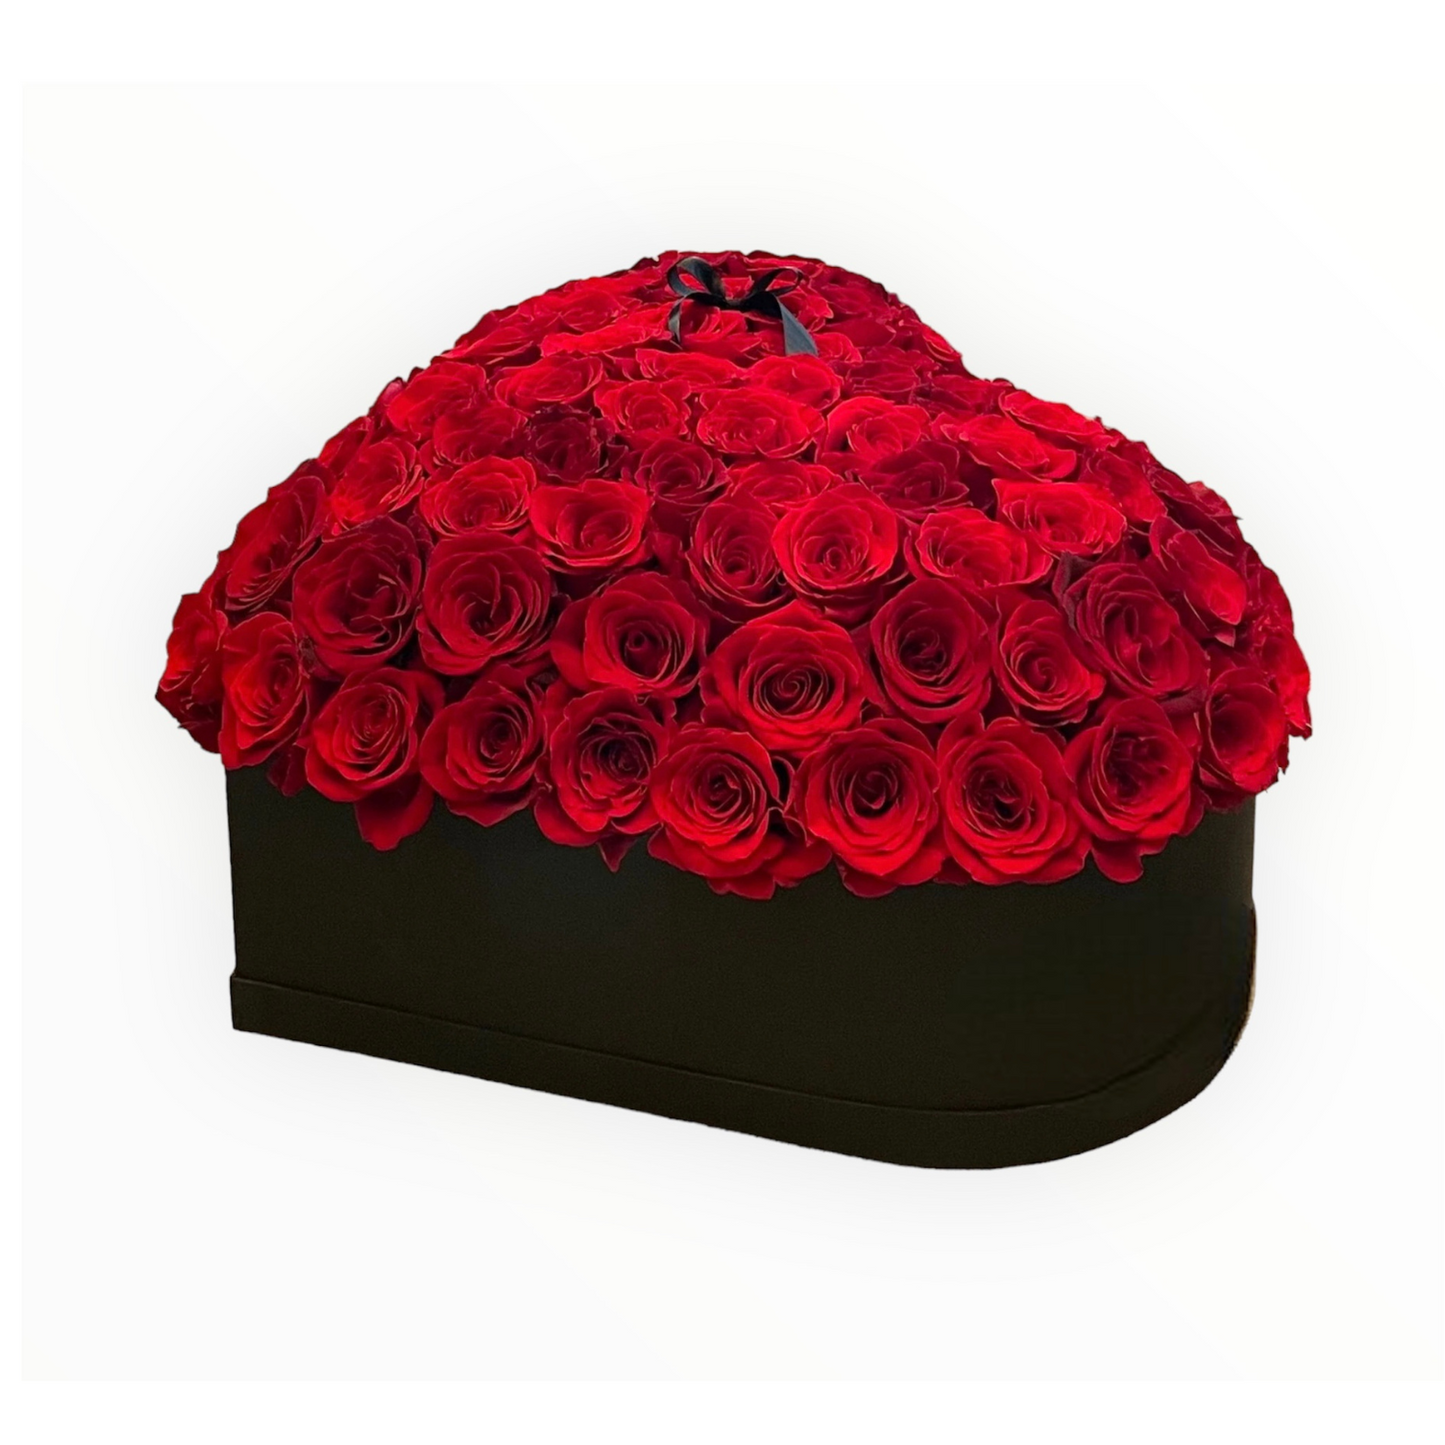 The Heart rose box 3D Red